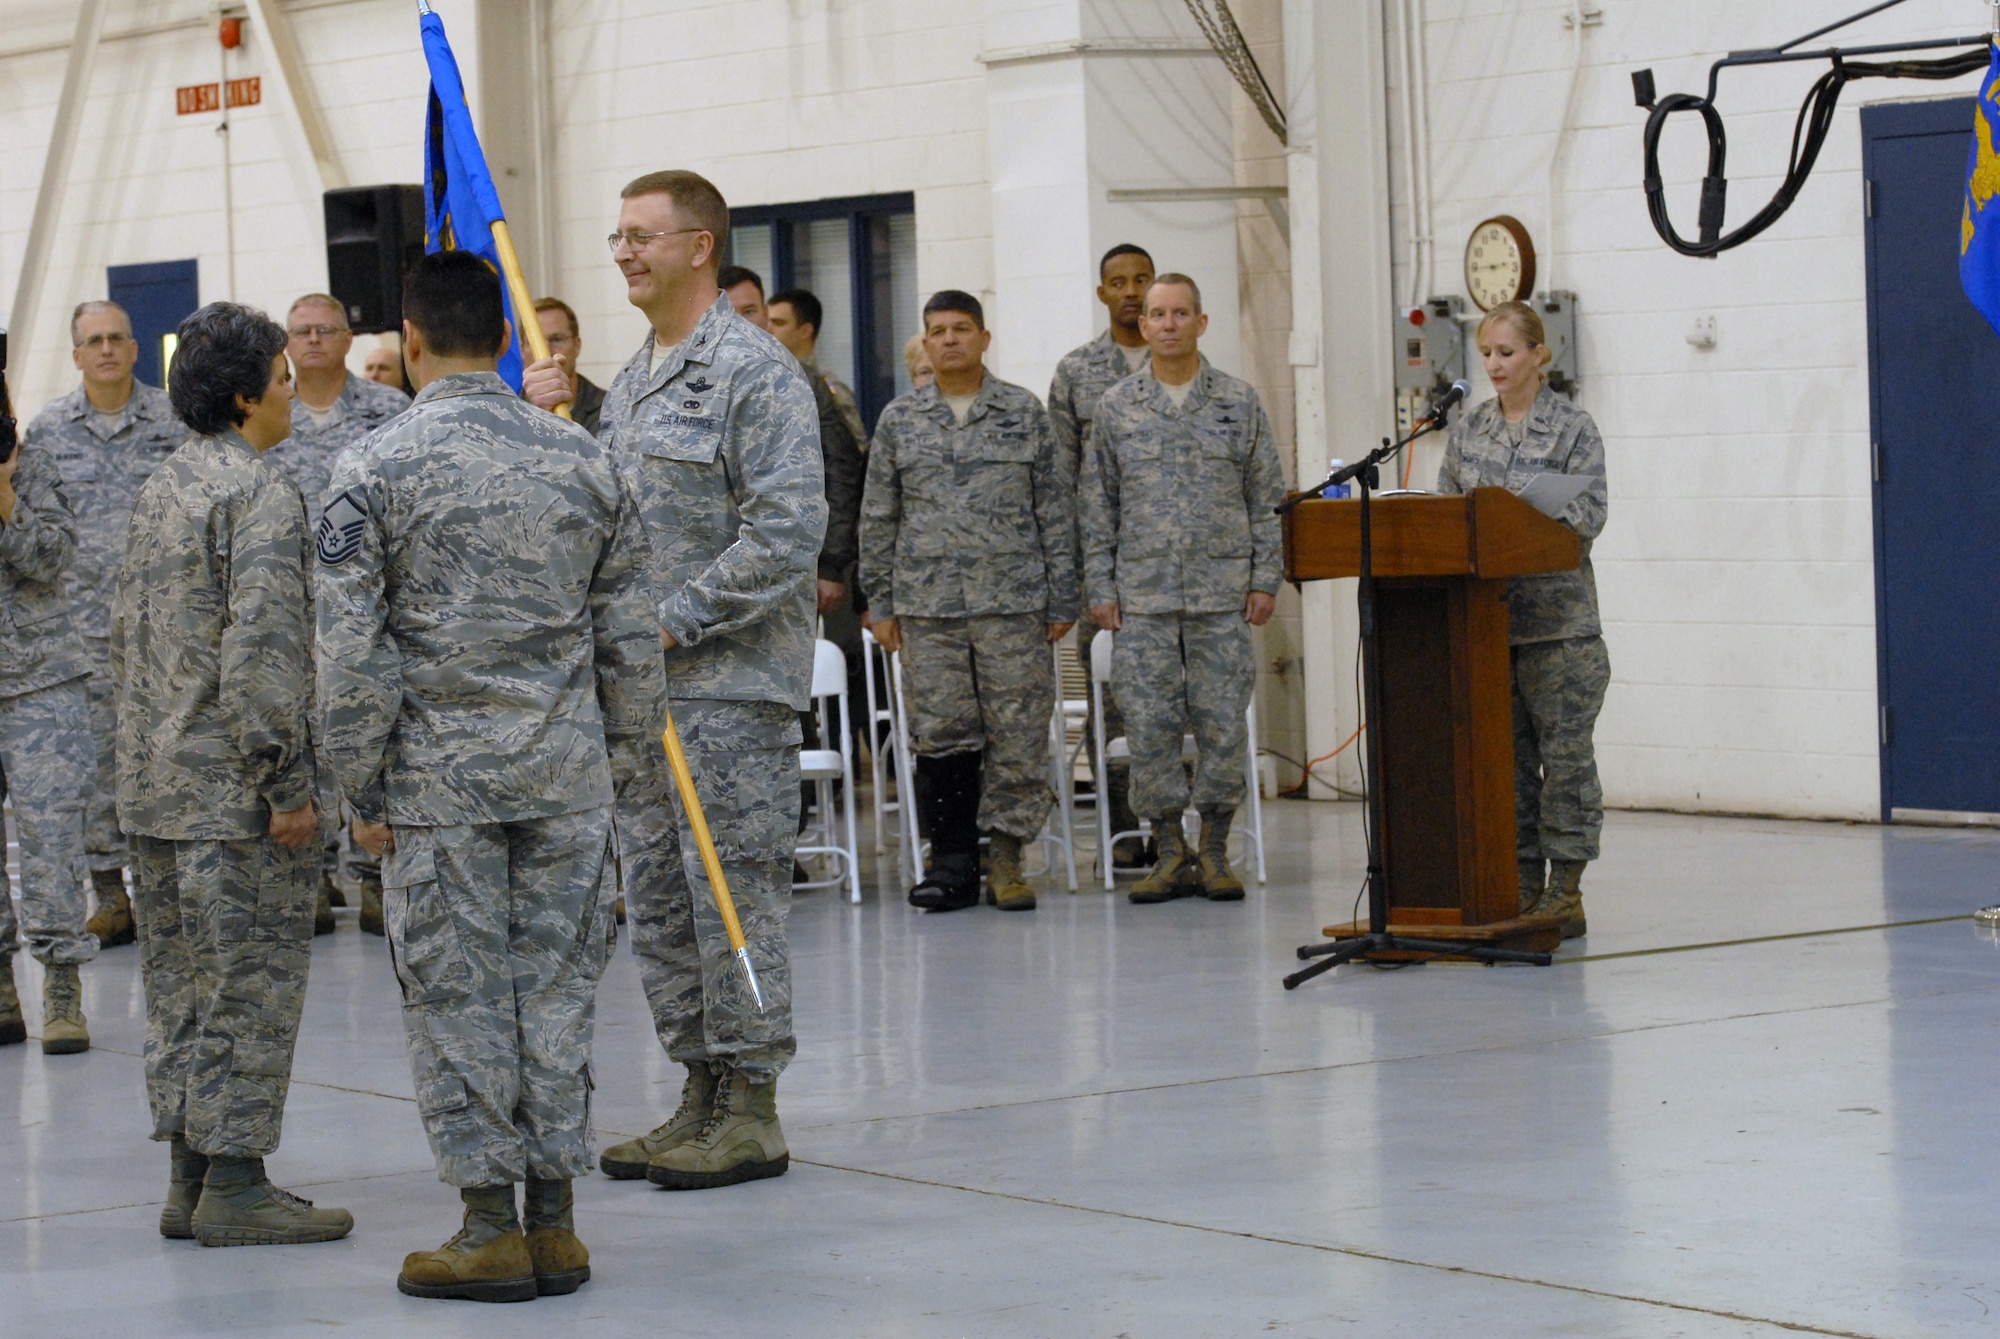 U.S. Air Force Col. Barbara Doncaster assumes command of the 145th Mission Support Group by accepting guidon from Col. Roger E. Williams, Jr., commander 145th Airlift Wing, during a Change of Command ceremony held at the North Carolina Air National Guard base, Charlotte-Douglas Intl. airport, Jan. 11, 2014. In addition to the men and women of the 145th AW, several leaders were also in attendance including Maj. Gen. Robert Stonestreet, ANG assistant to the commander, Air Force Space Command; Brig. Gen. Todd D. Kelly, N.C. assistant adjutant general- Air  and Col. Clarence Ervin, NCANG, Director of Staff - Air (U.S. Air National Guard photo by Senior Airman Laura Montgomery/Released)